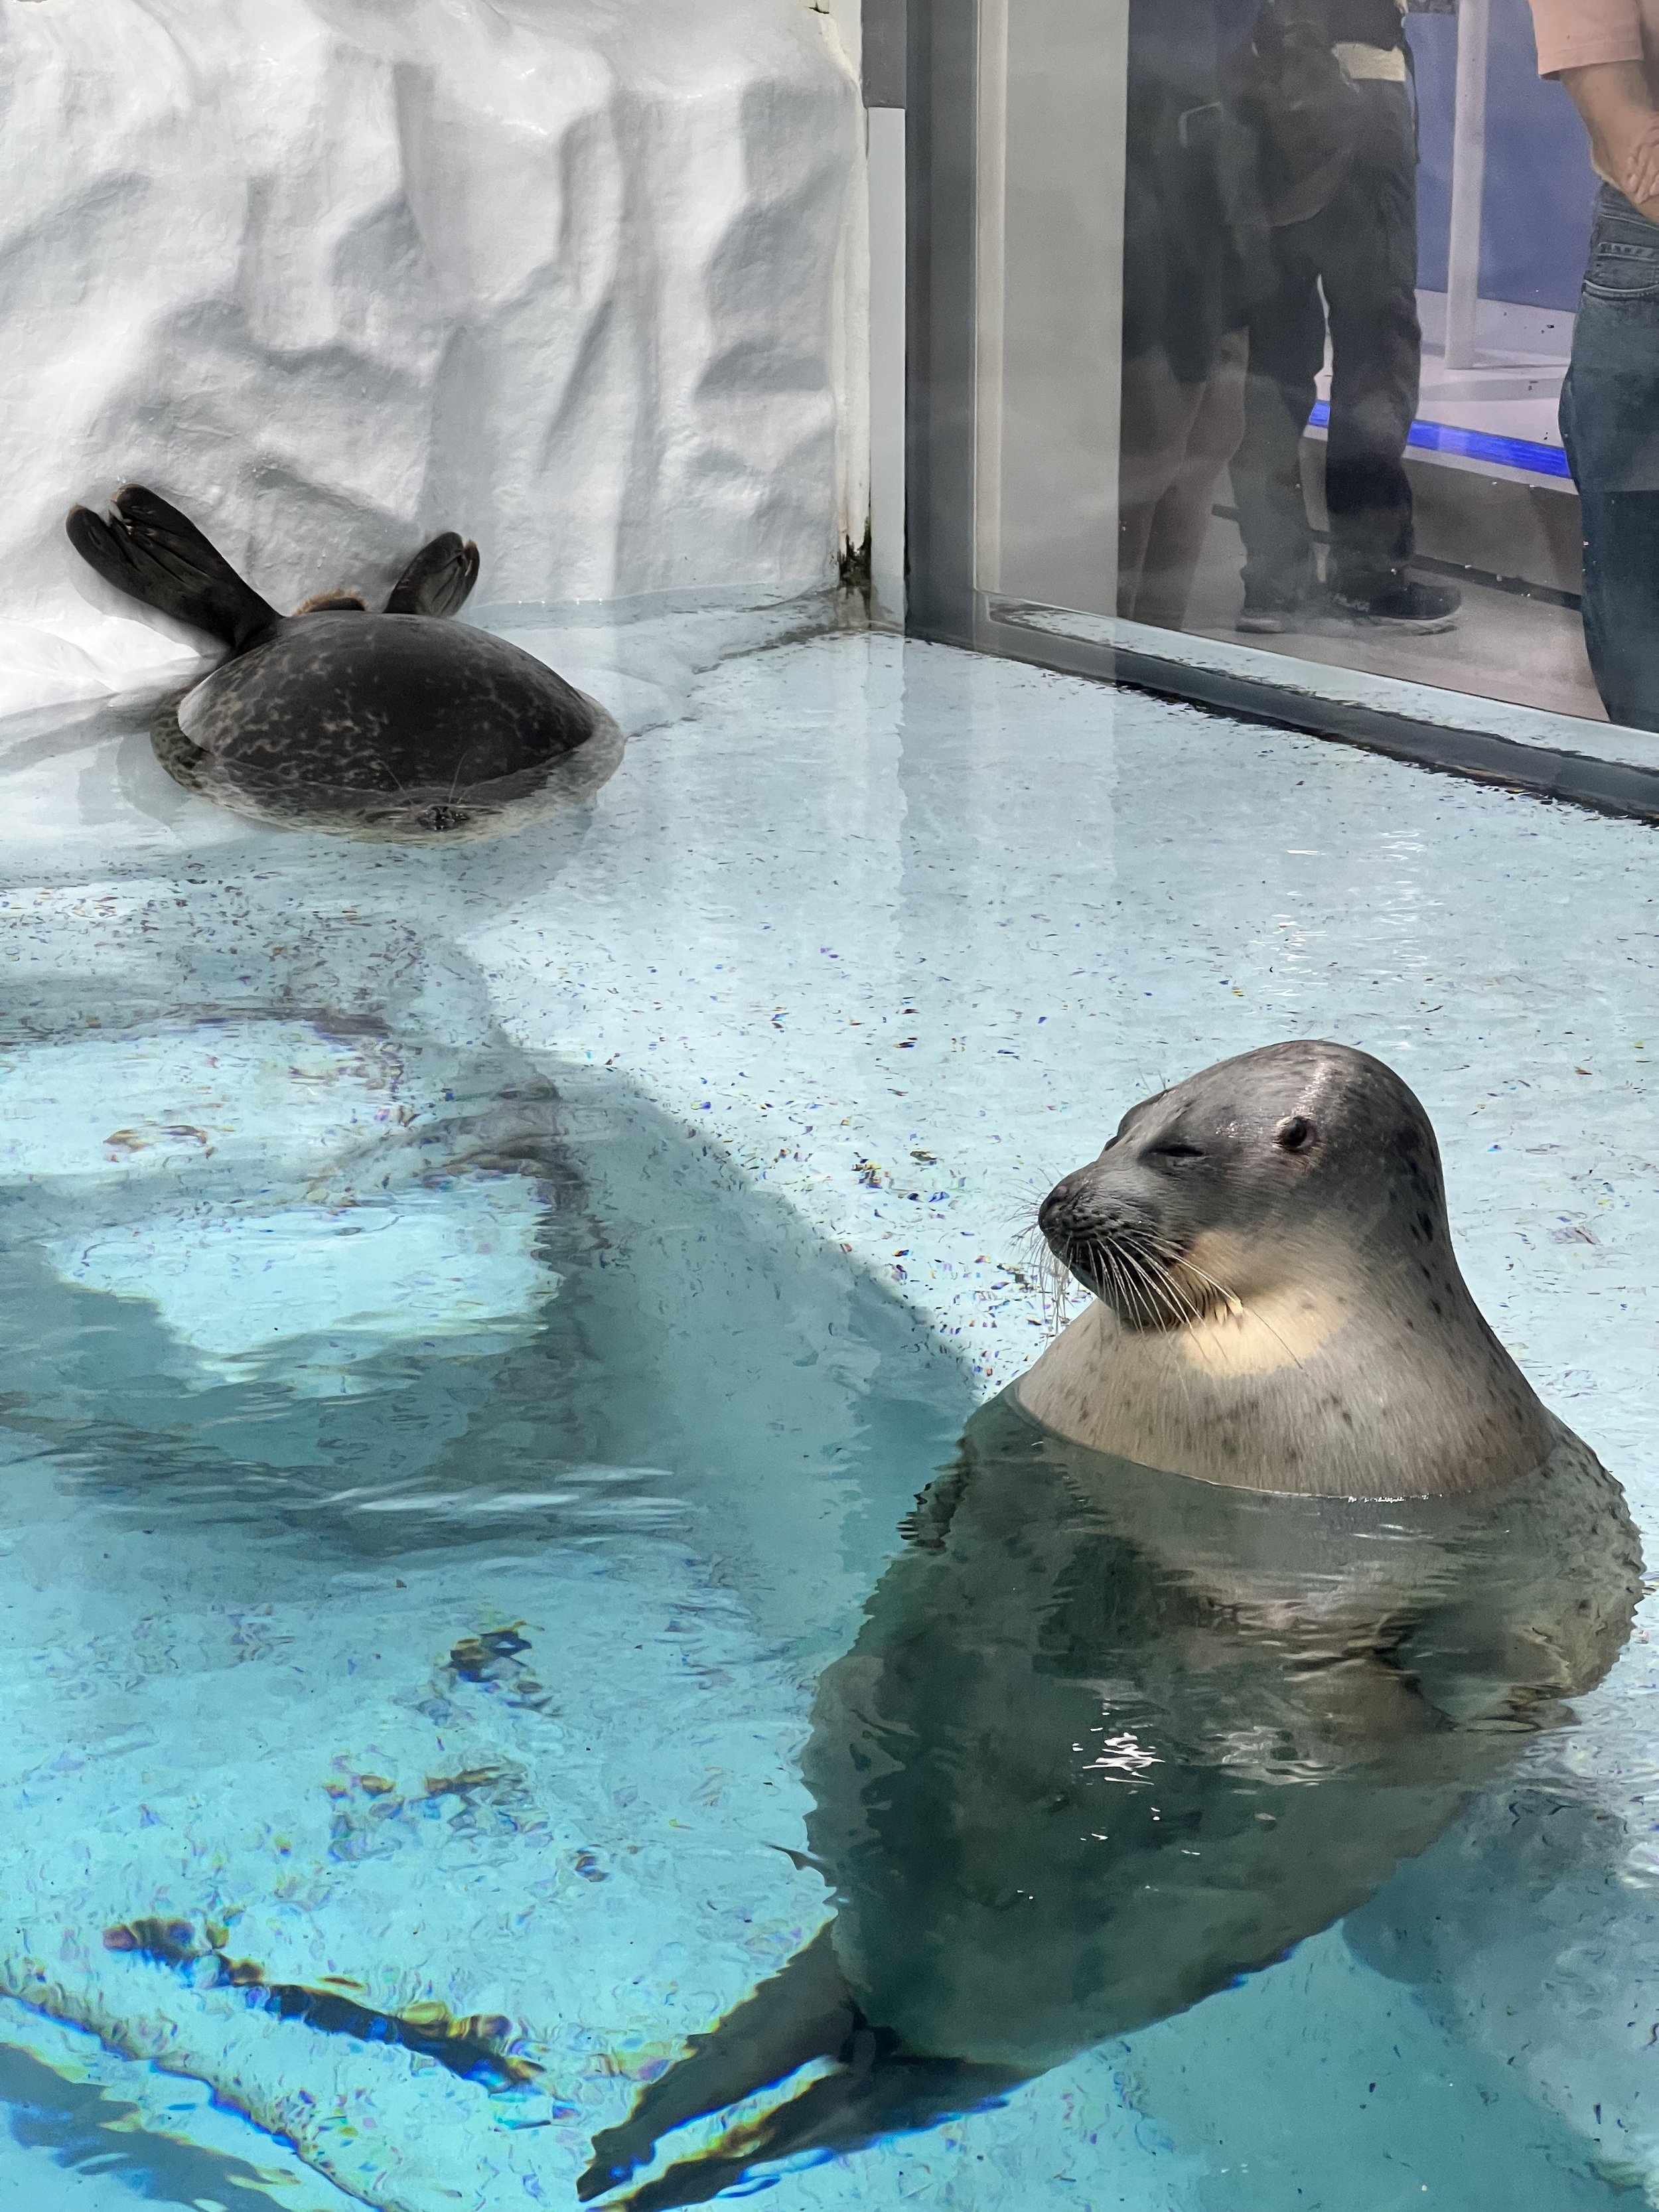  Two ringed seals in an enclosure 